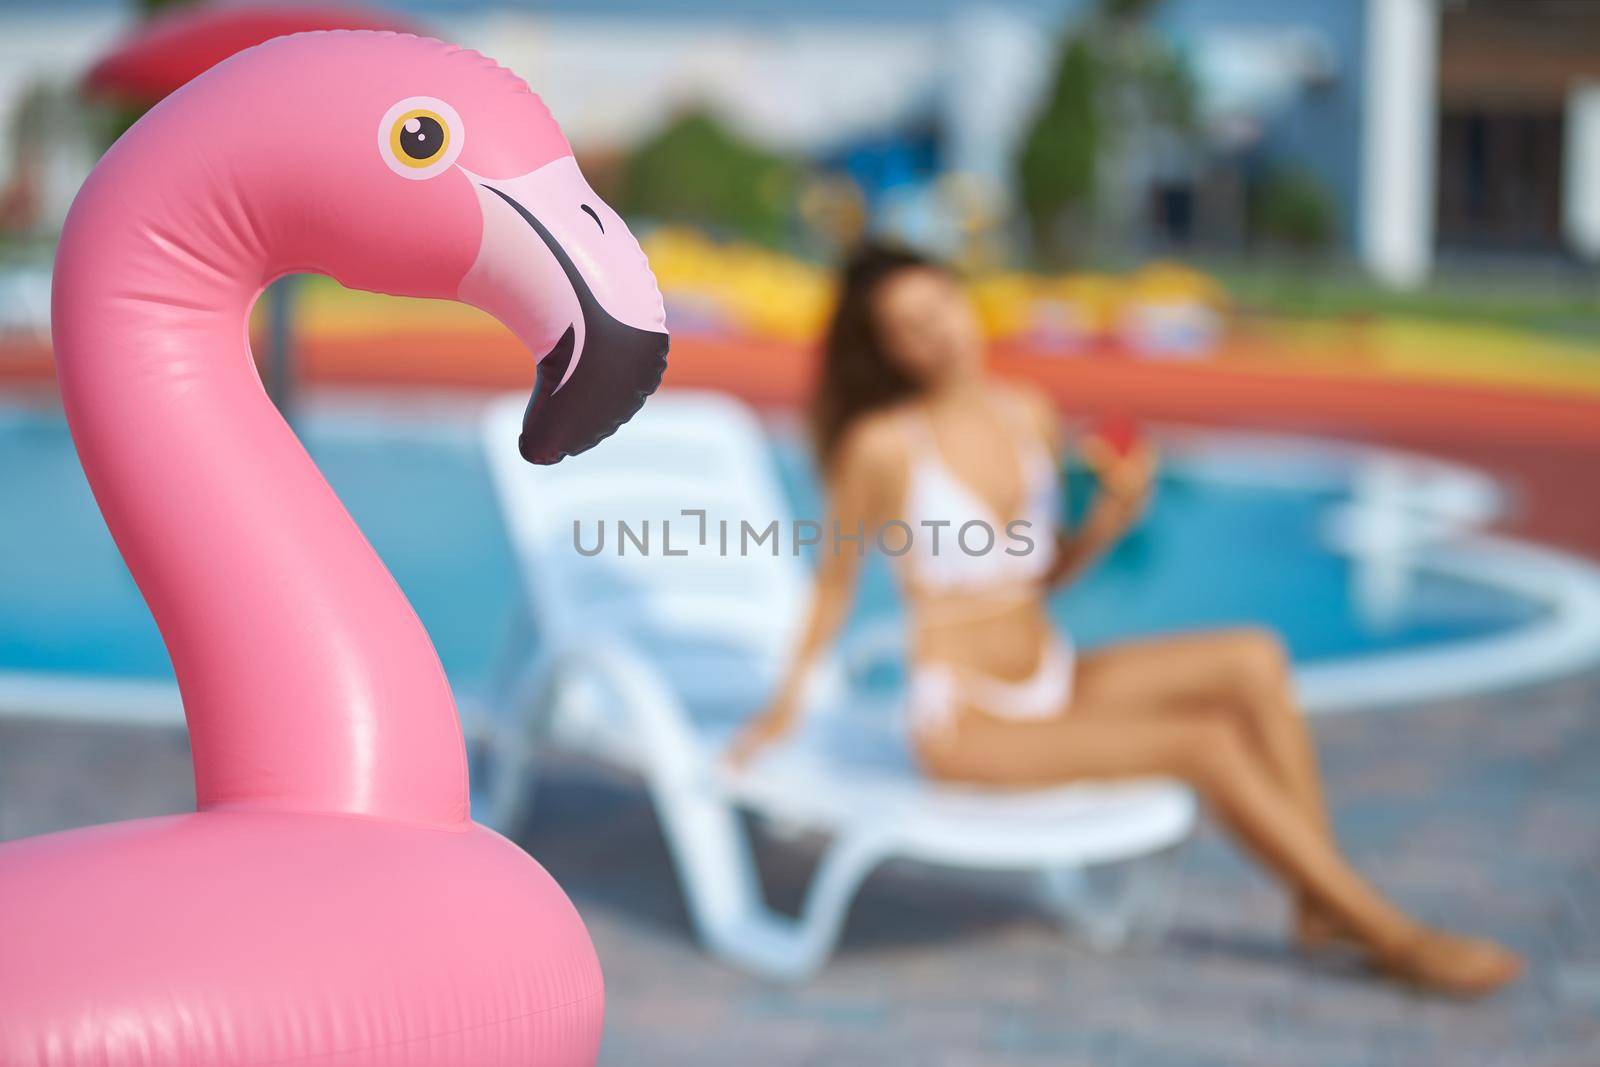 Inflatable pink flamingo ring at swimming pool area outside. Close up view of pink flamingo air mattress with blurred female figure sitting on lounge chair on background. Concept of water activities.